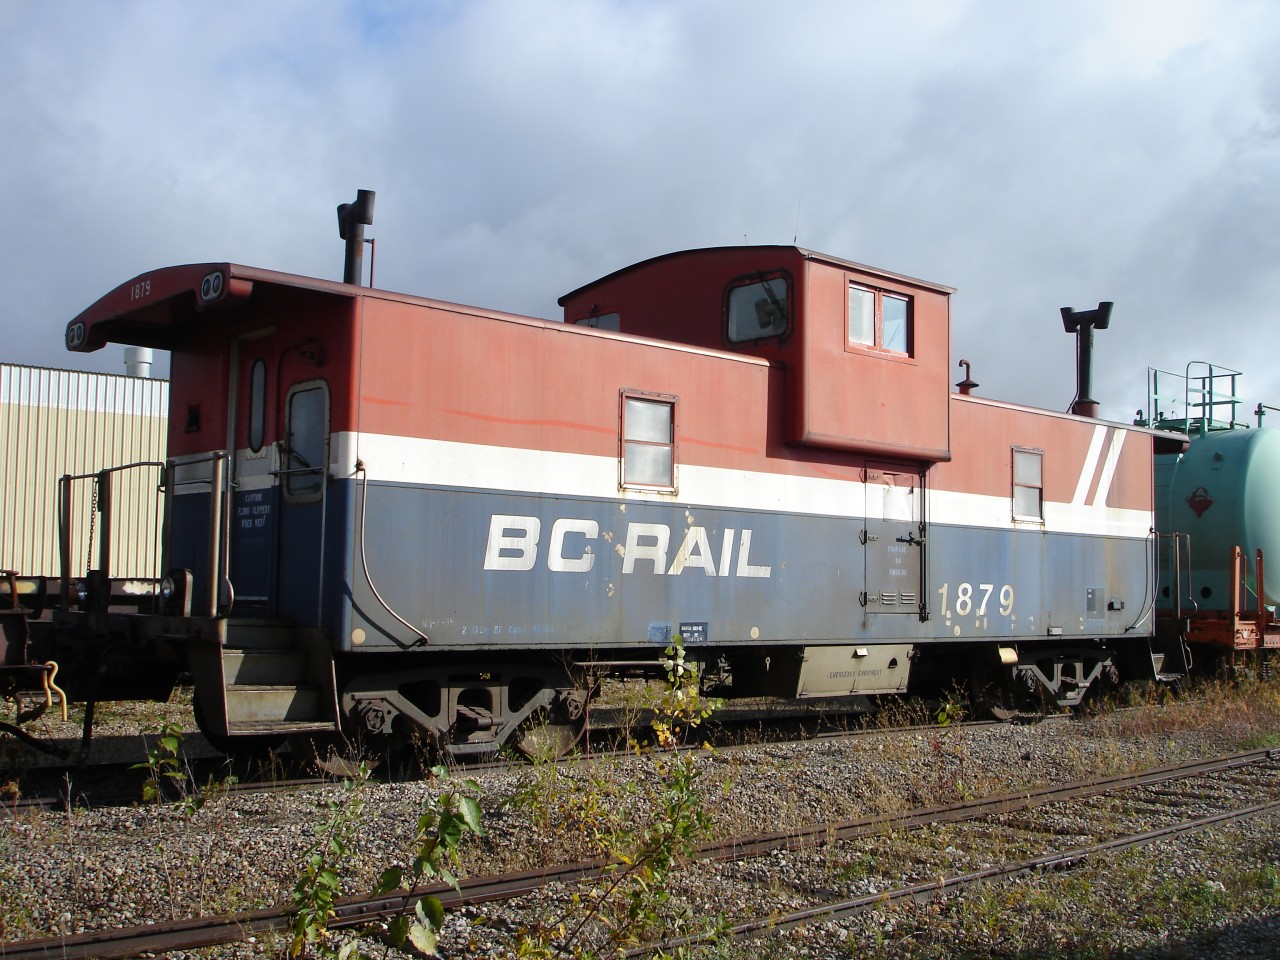 BCOL 1879  
BCOL 1879 is a long way from home at the CN Work Equipment Repair Facility yard in Transcona, MB. At this point in its life, it has been relegated to Engineering work train service.